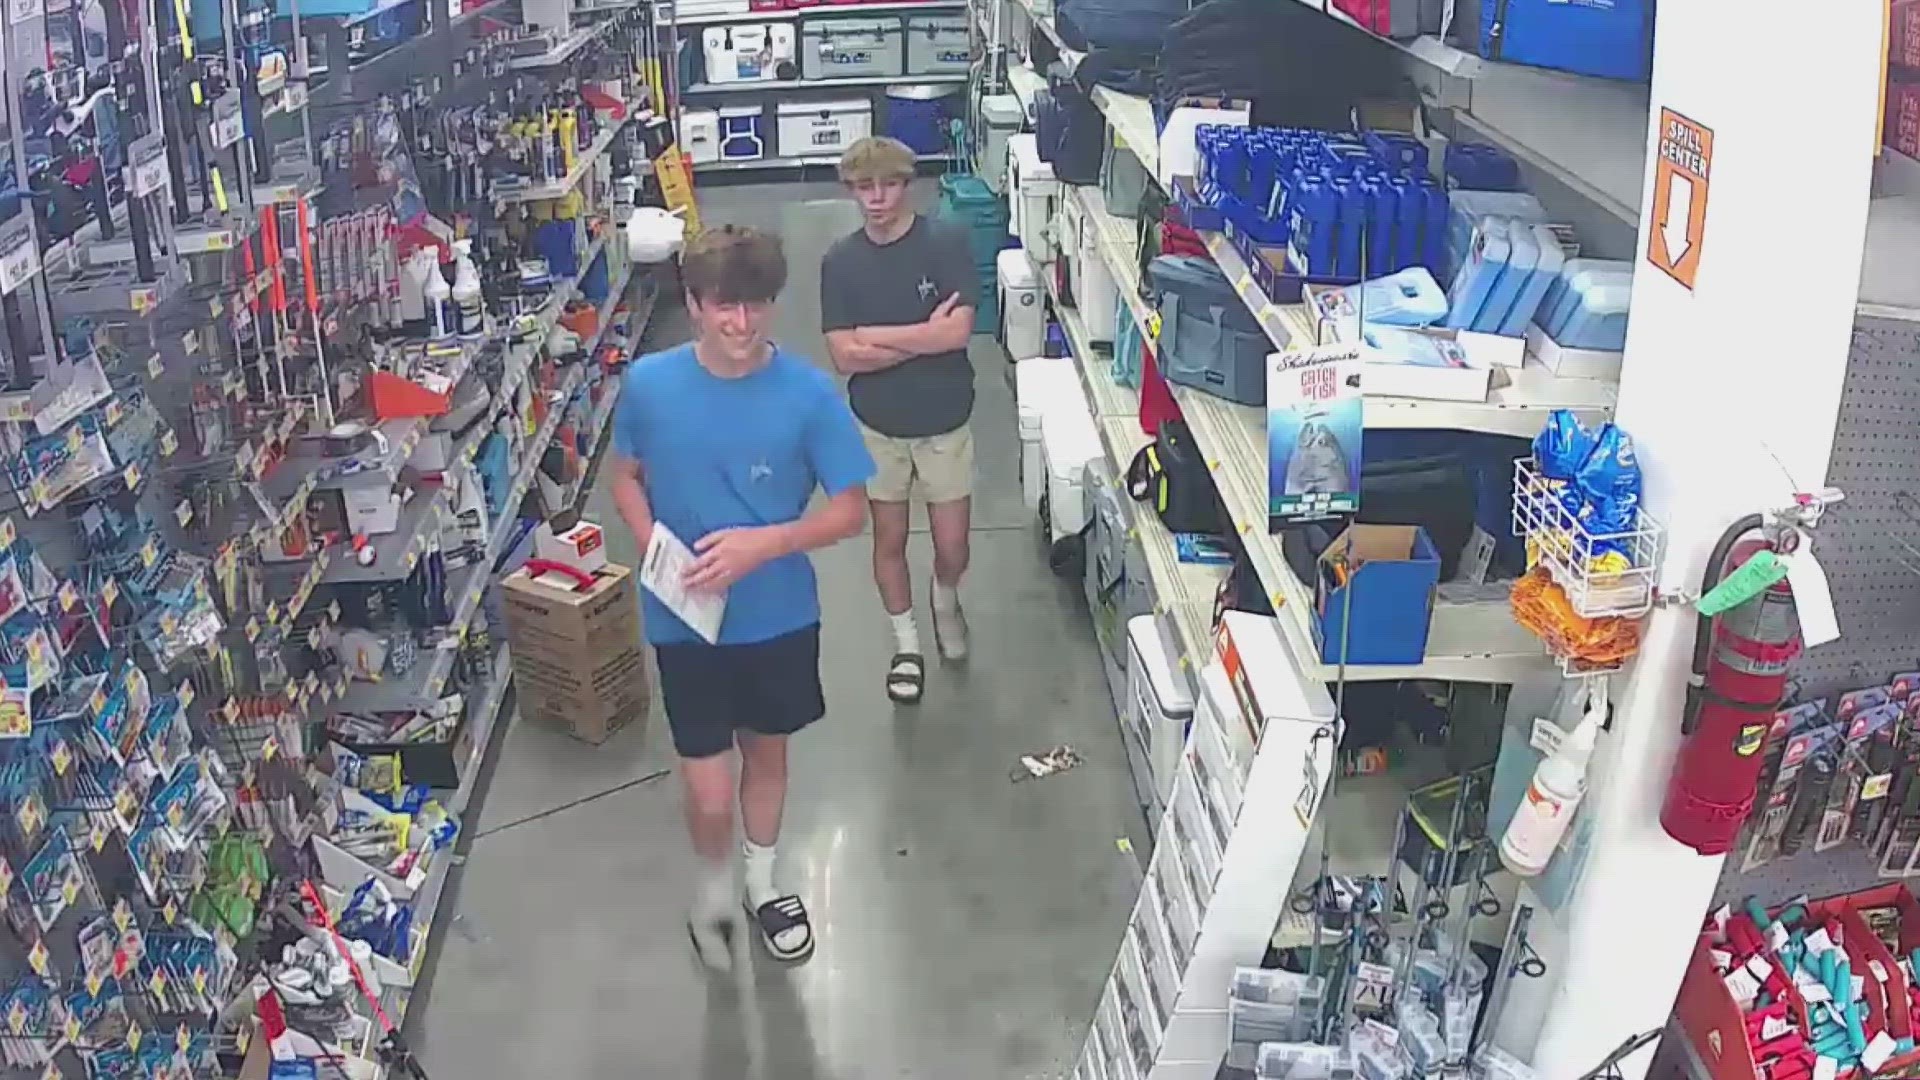 A fire at a busy Walmart in Covington, Louisiana damaged most of the store's merchandise and the store could be closed for more than a month. Two suspects are sought